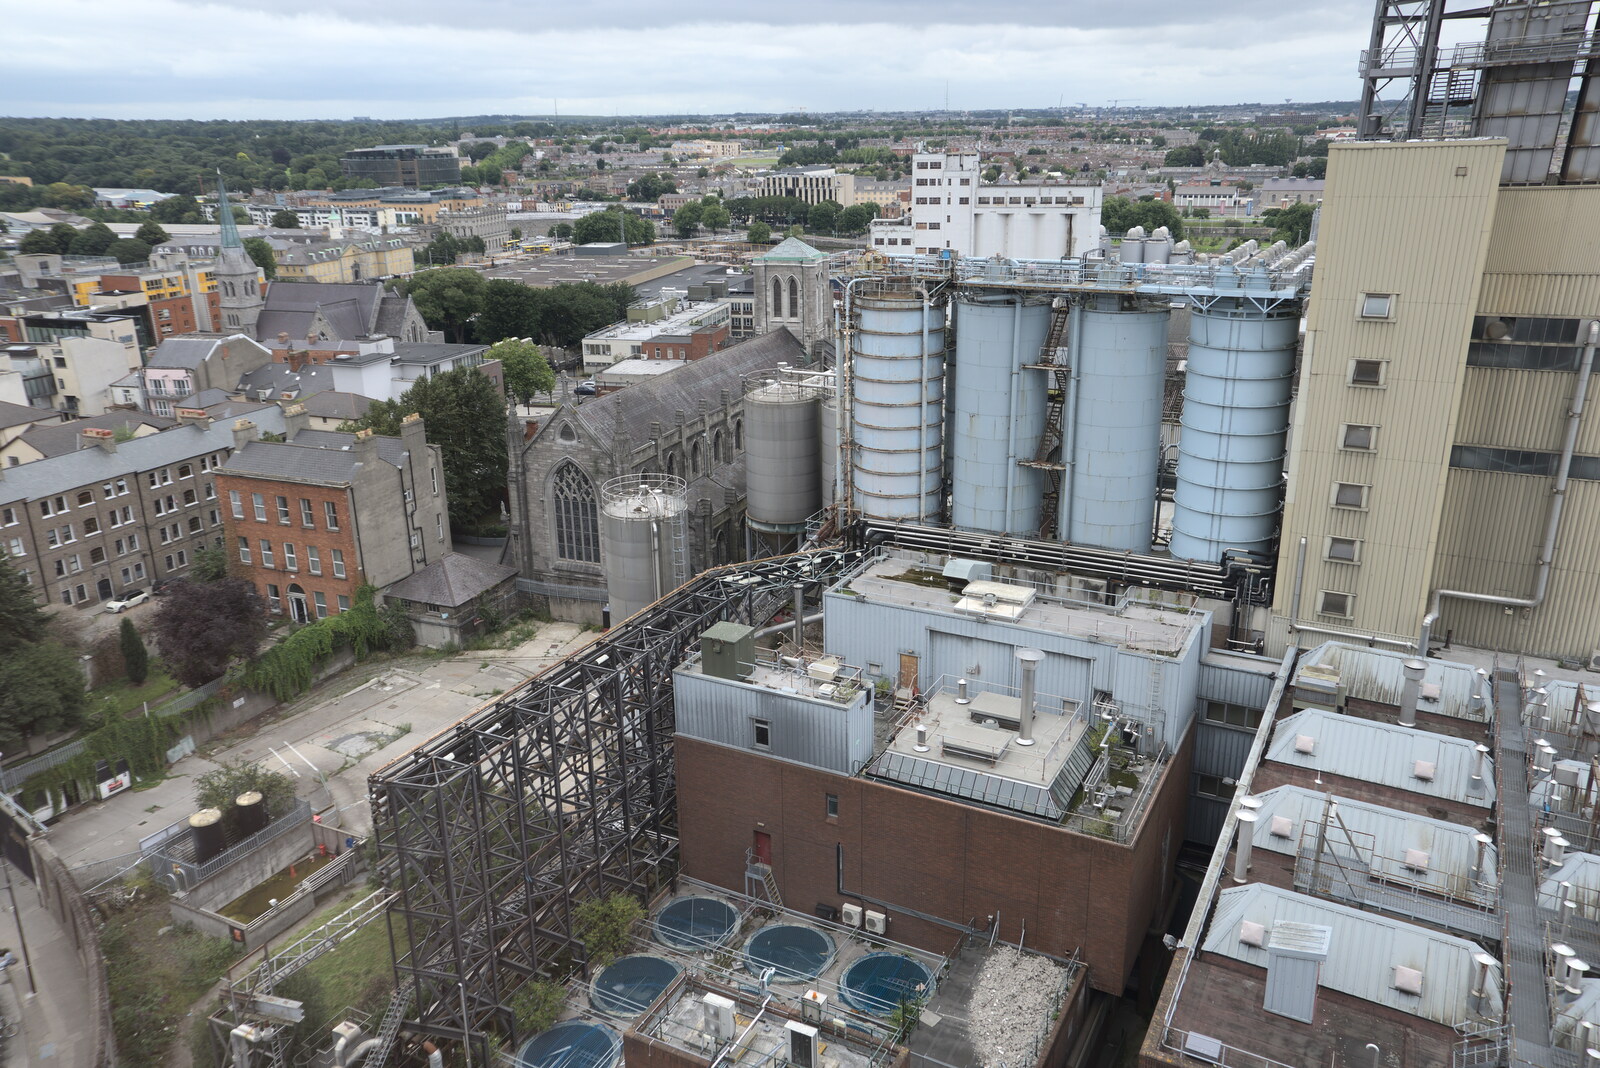 Another factory view from The Guinness Storehouse Tour, St. James's Gate, Dublin, Ireland - 17th August 2021